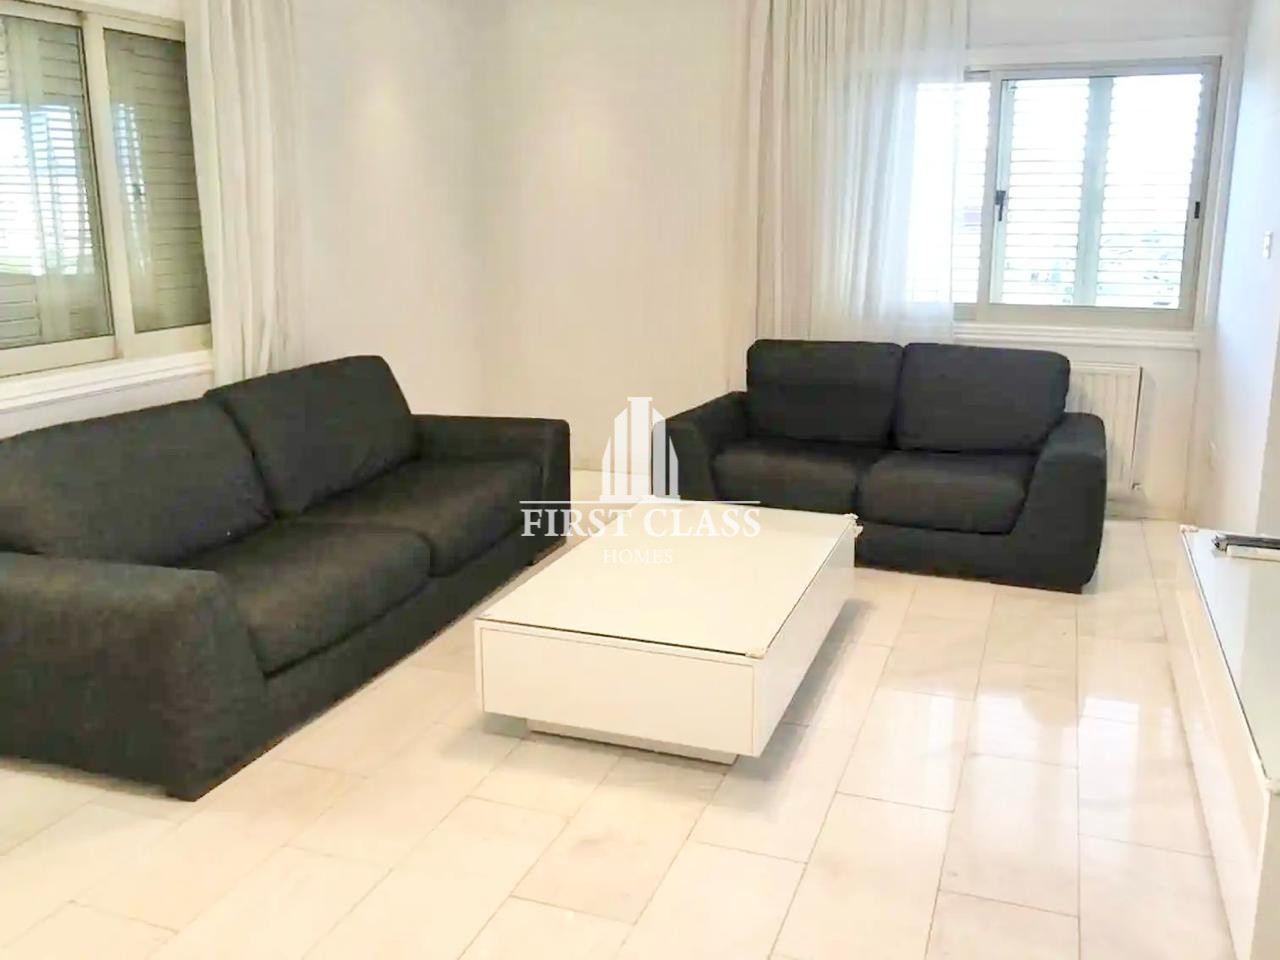 Property for Rent: Apartment (Penthouse) in Dasoupoli, Nicosia for Rent | Key Realtor Cyprus